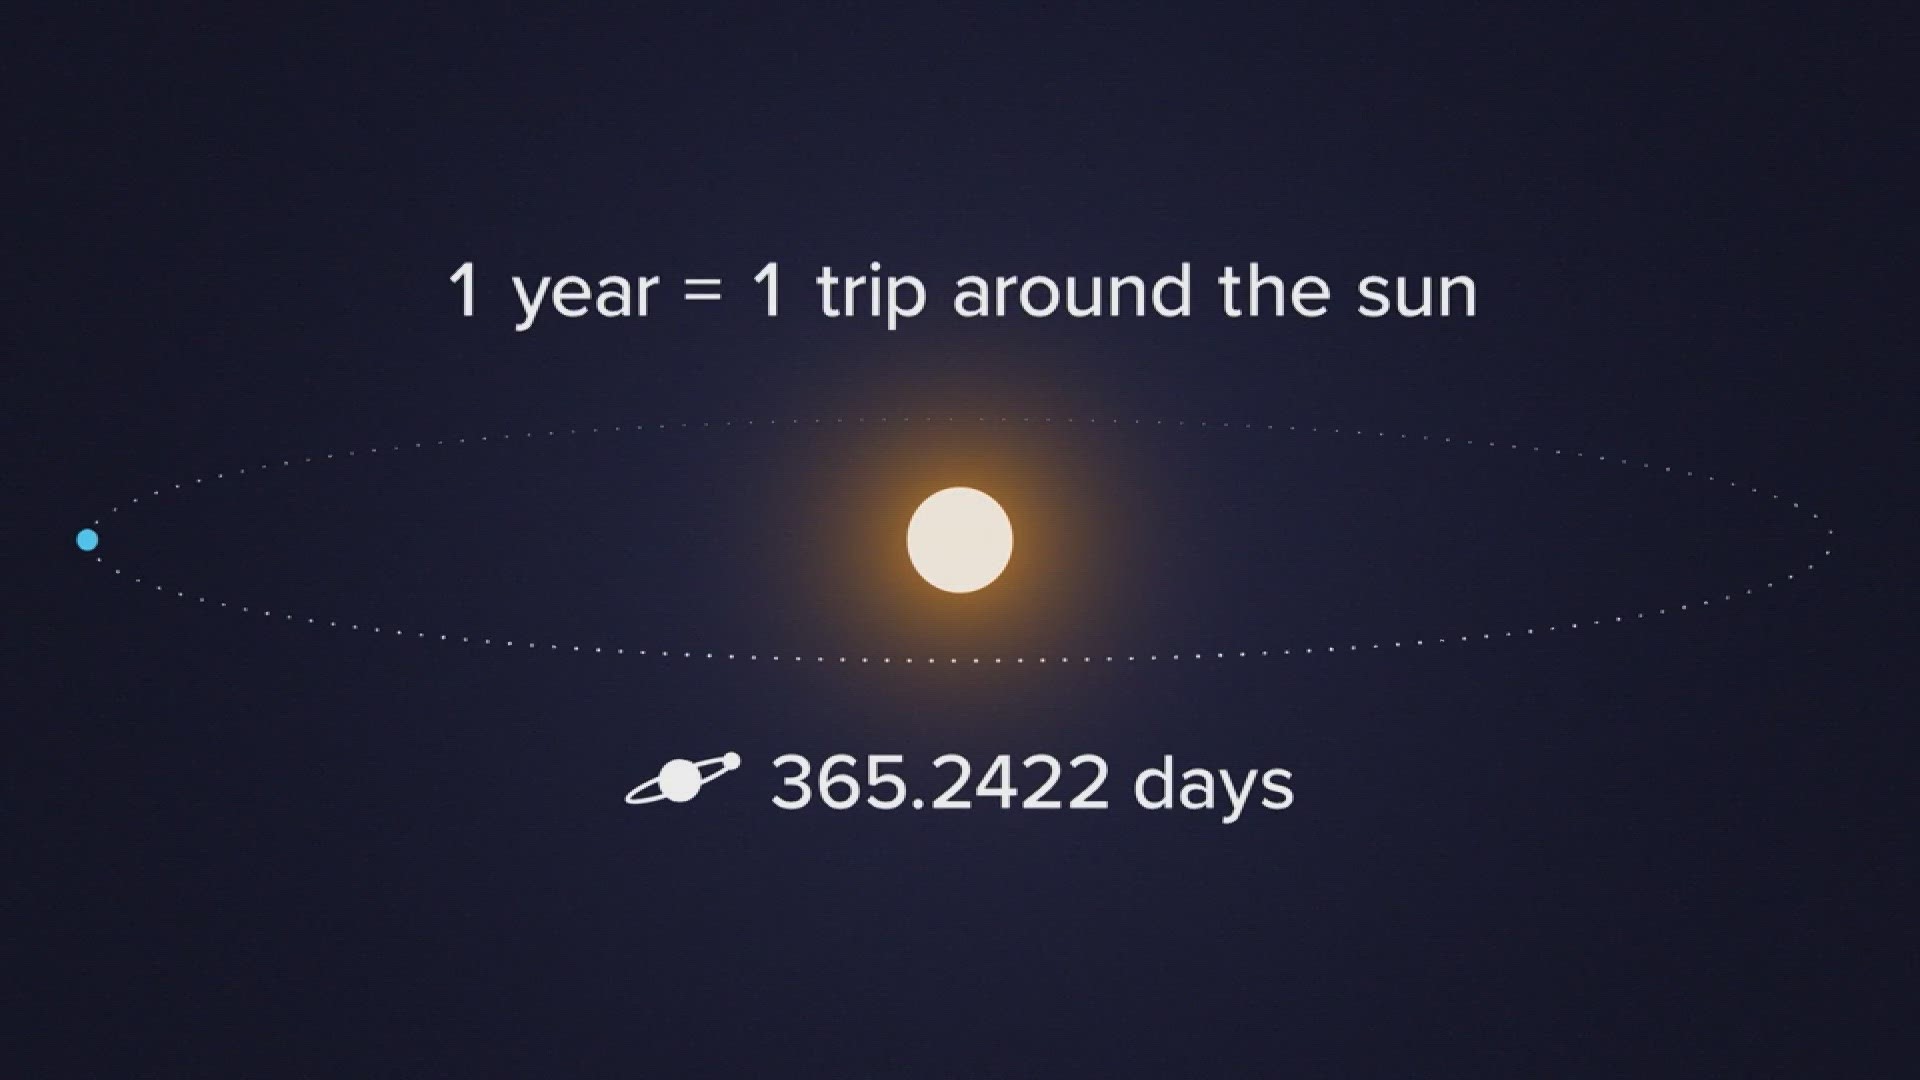 It's a correction to counter the fact that Earth's orbit isn't precisely 365 days a year.